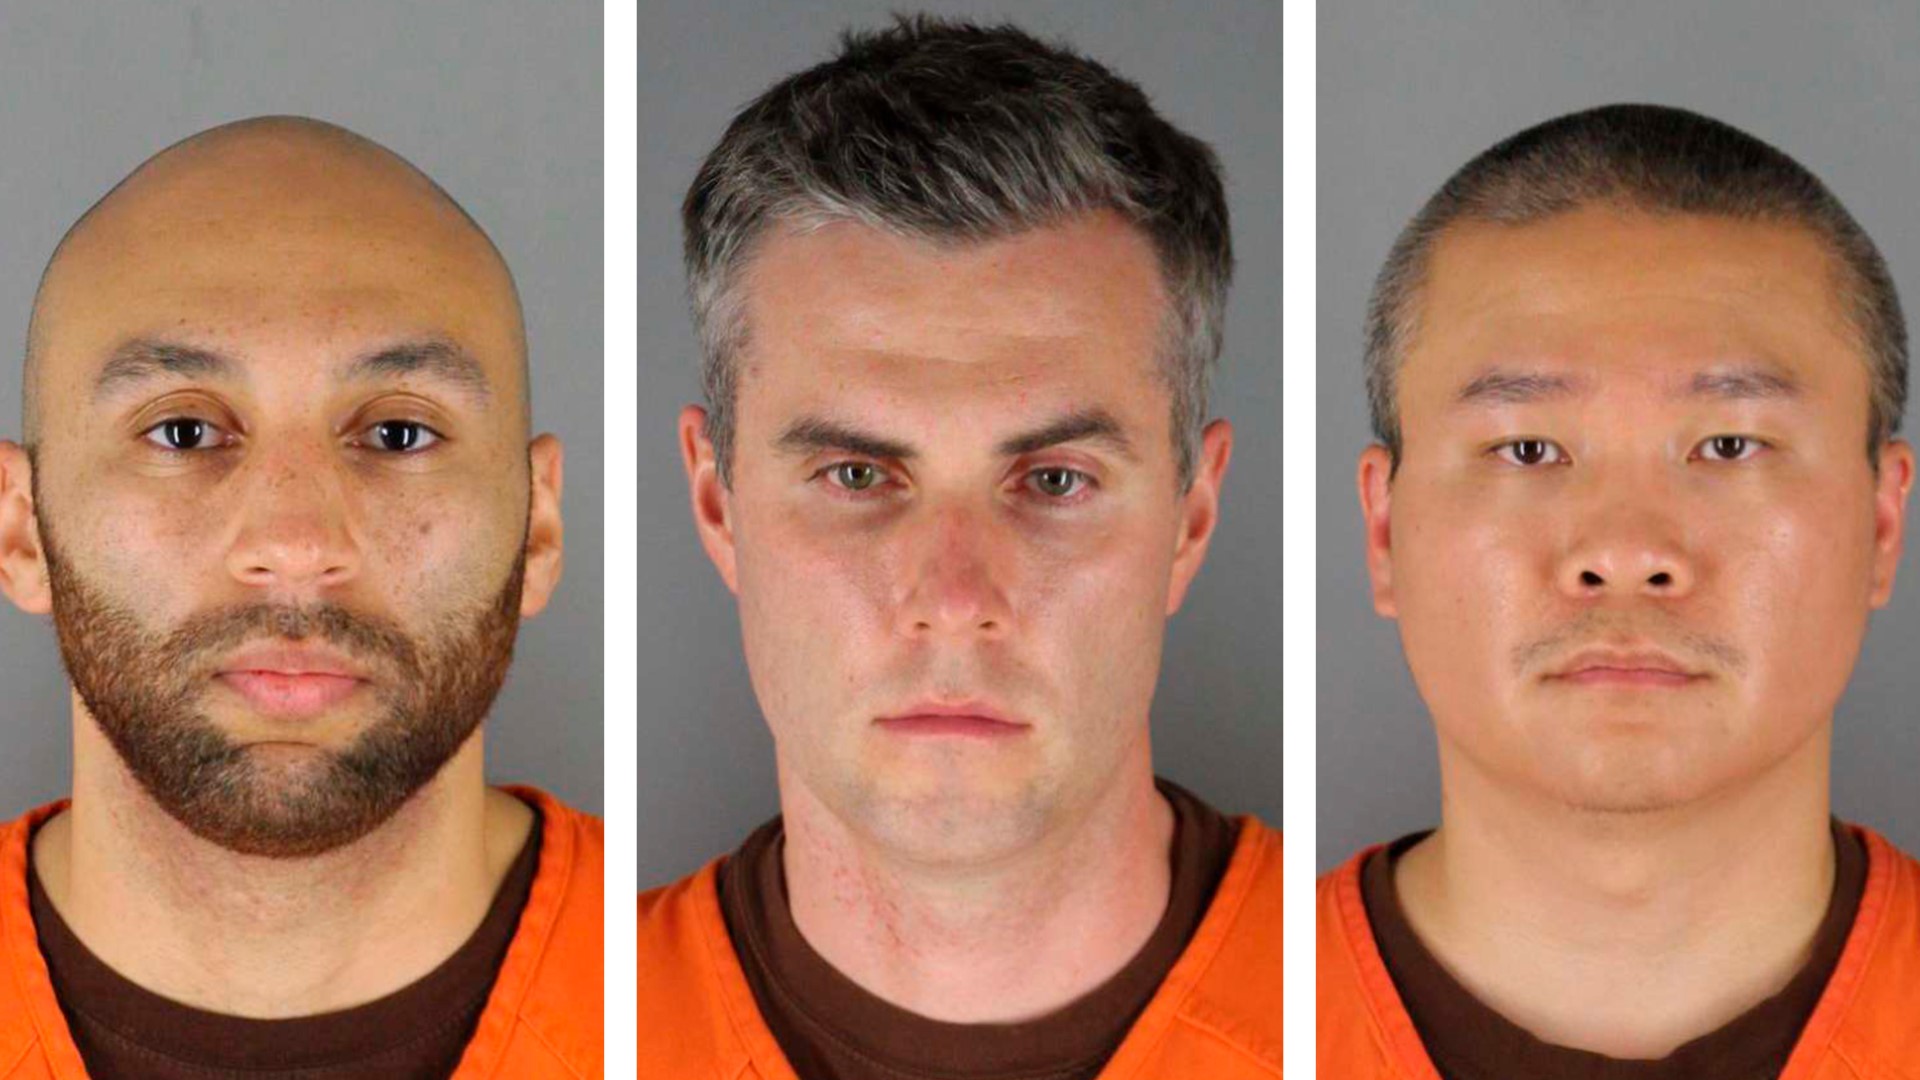 The trial for the three other officers charged in George Floyd’s death, Tou Thao, Thomas Lane and J. Alexander Kueng, is scheduled to start in August.